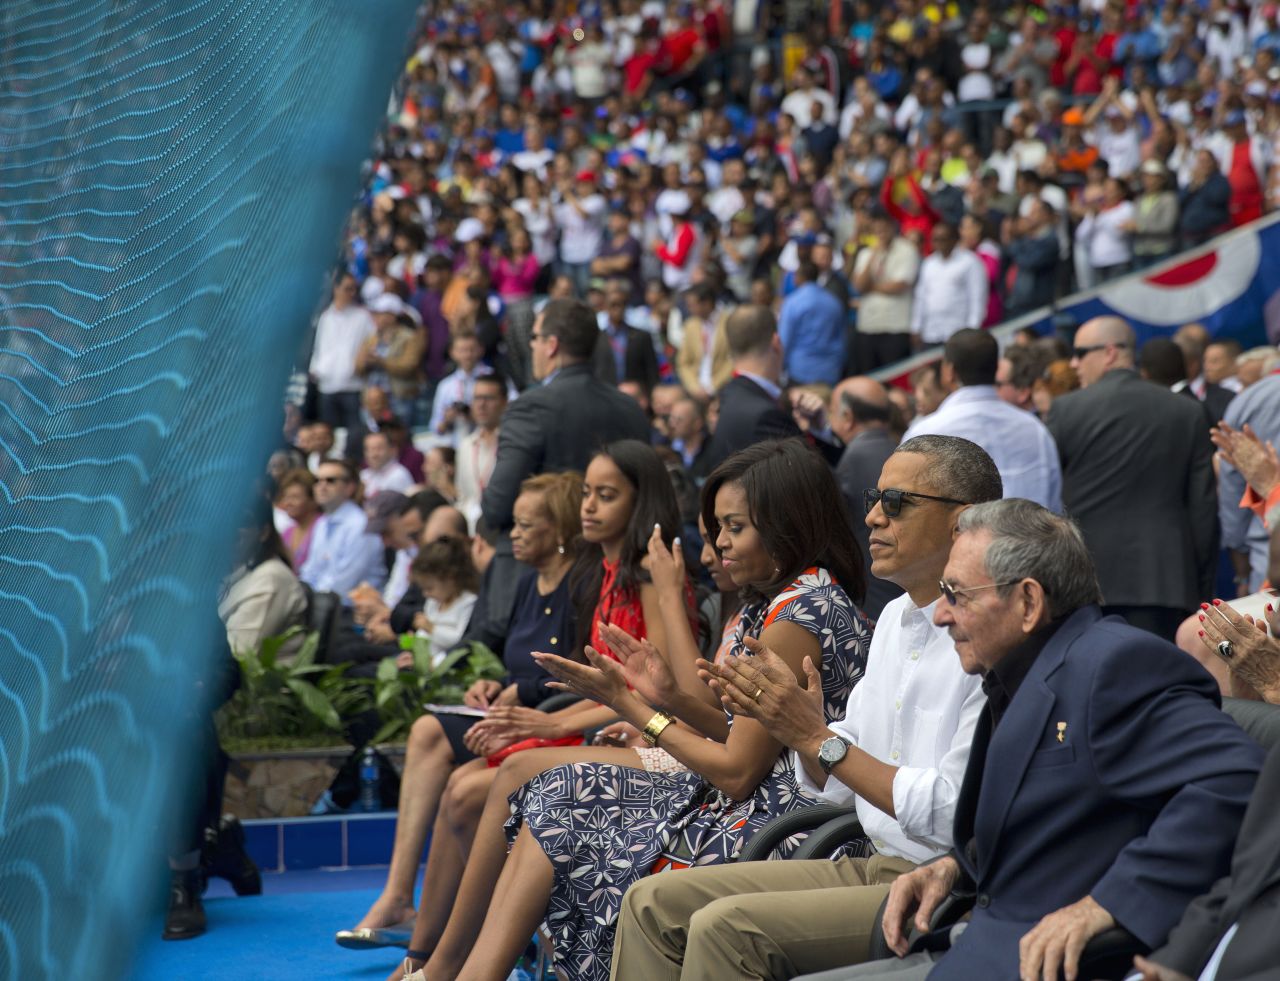 U.S. President Barack Obama attends a baseball game in Havana, Cuba, with his family and Cuban President Raul Castro, right, on Tuesday, March 22. The Cuban national team was playing an exhibition against Major League Baseball's Tampa Bay Rays. Obama is the first U.S. President to visit Cuba since Calvin Coolidge in 1928.